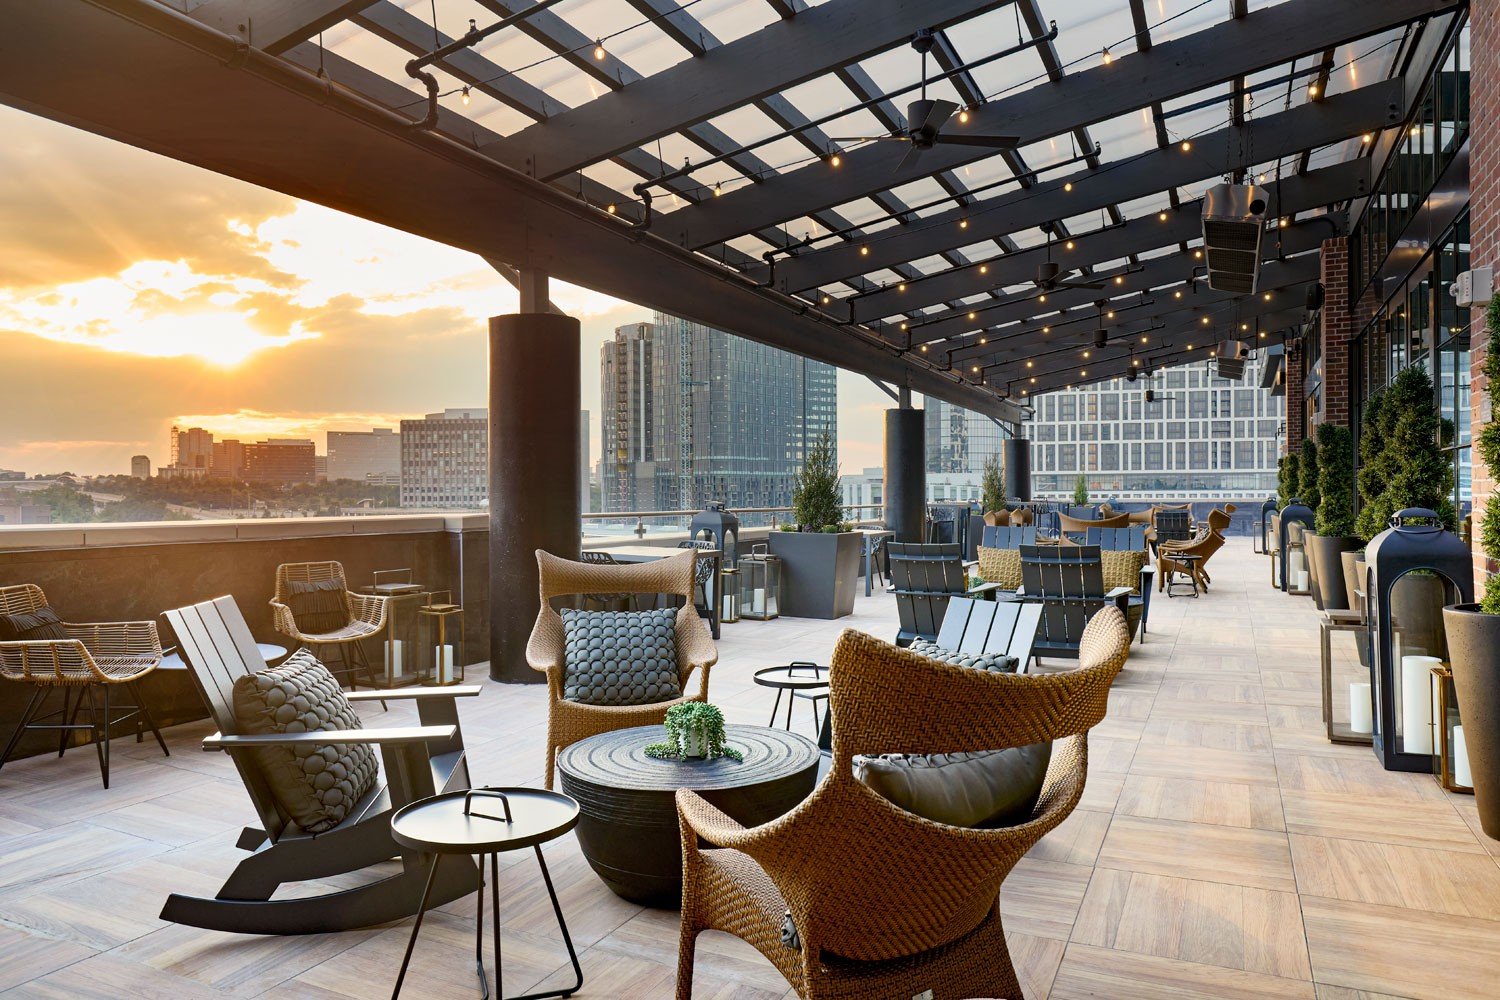 Archer Hotel Tysons - Penthouse Terrace seating at sunset